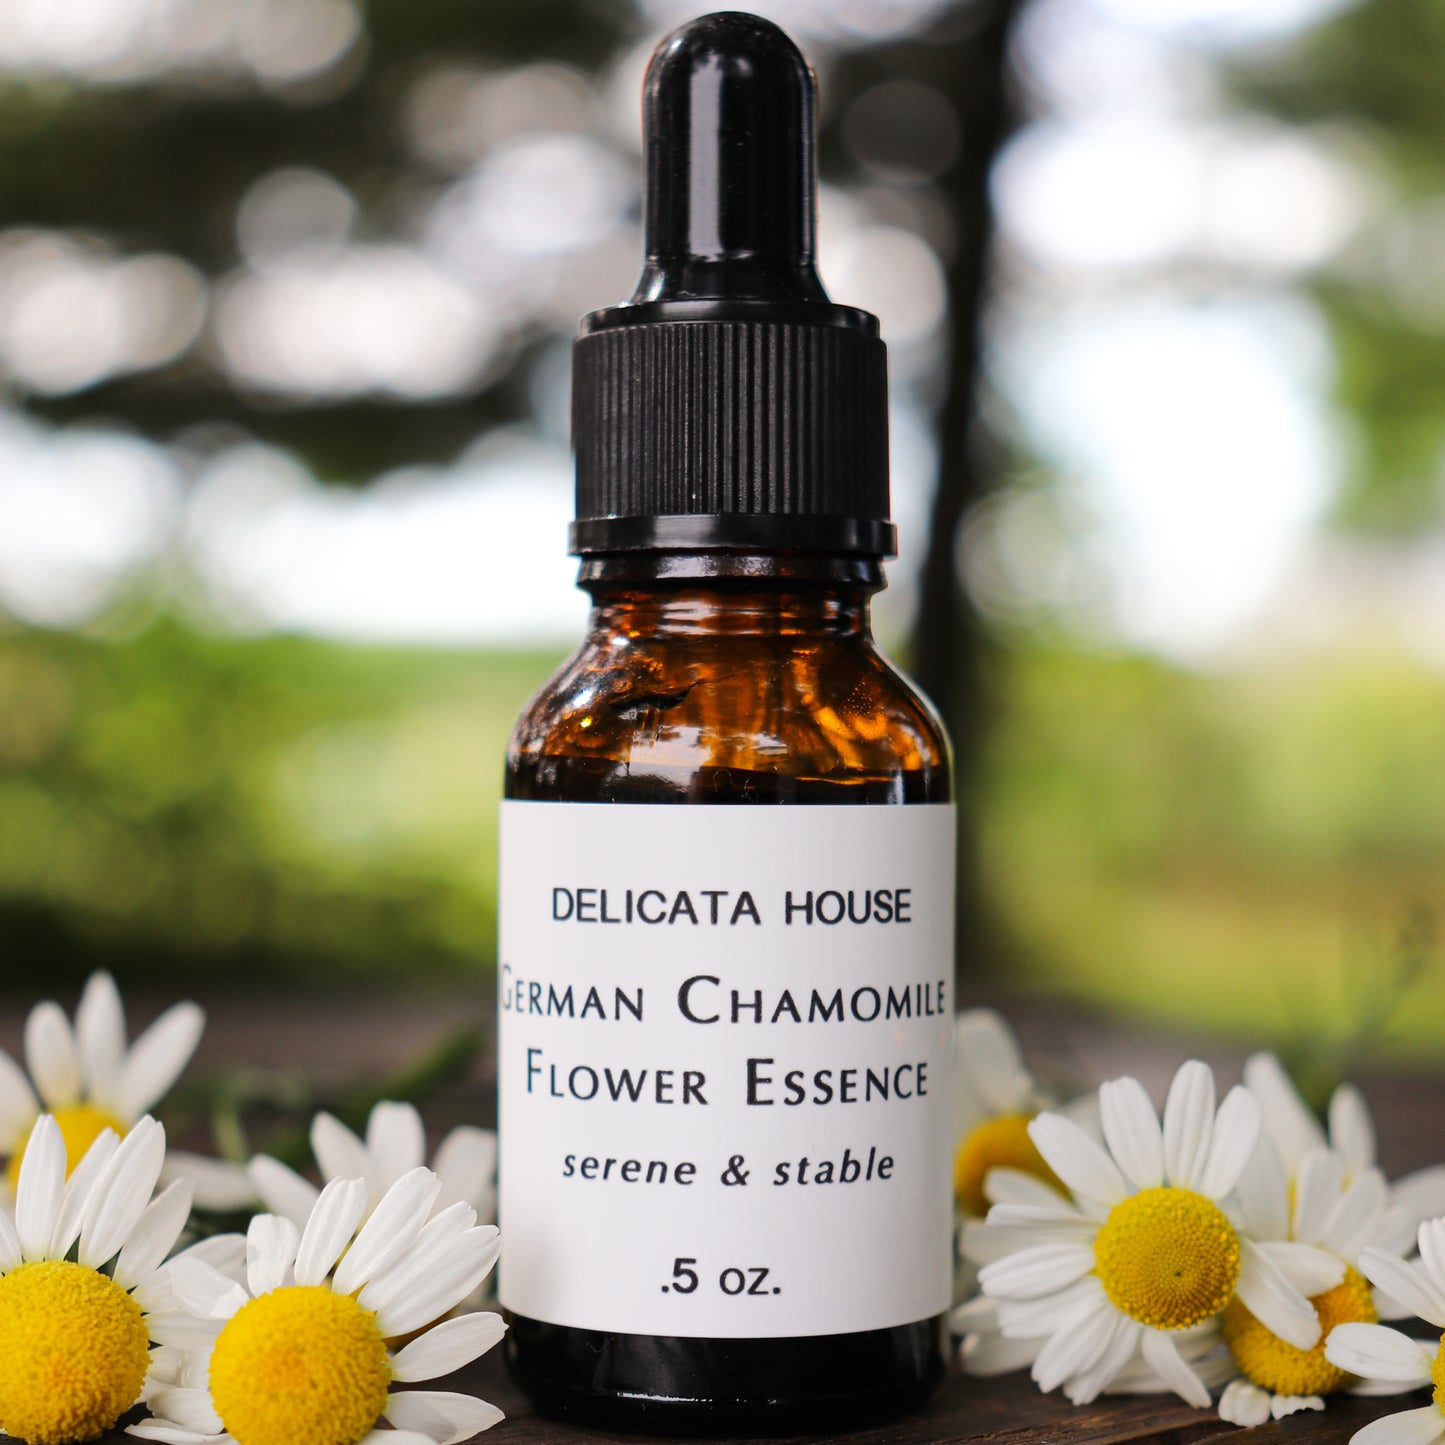 German Chamomile Flower Essence - Flower Essence for Serenity and Stability